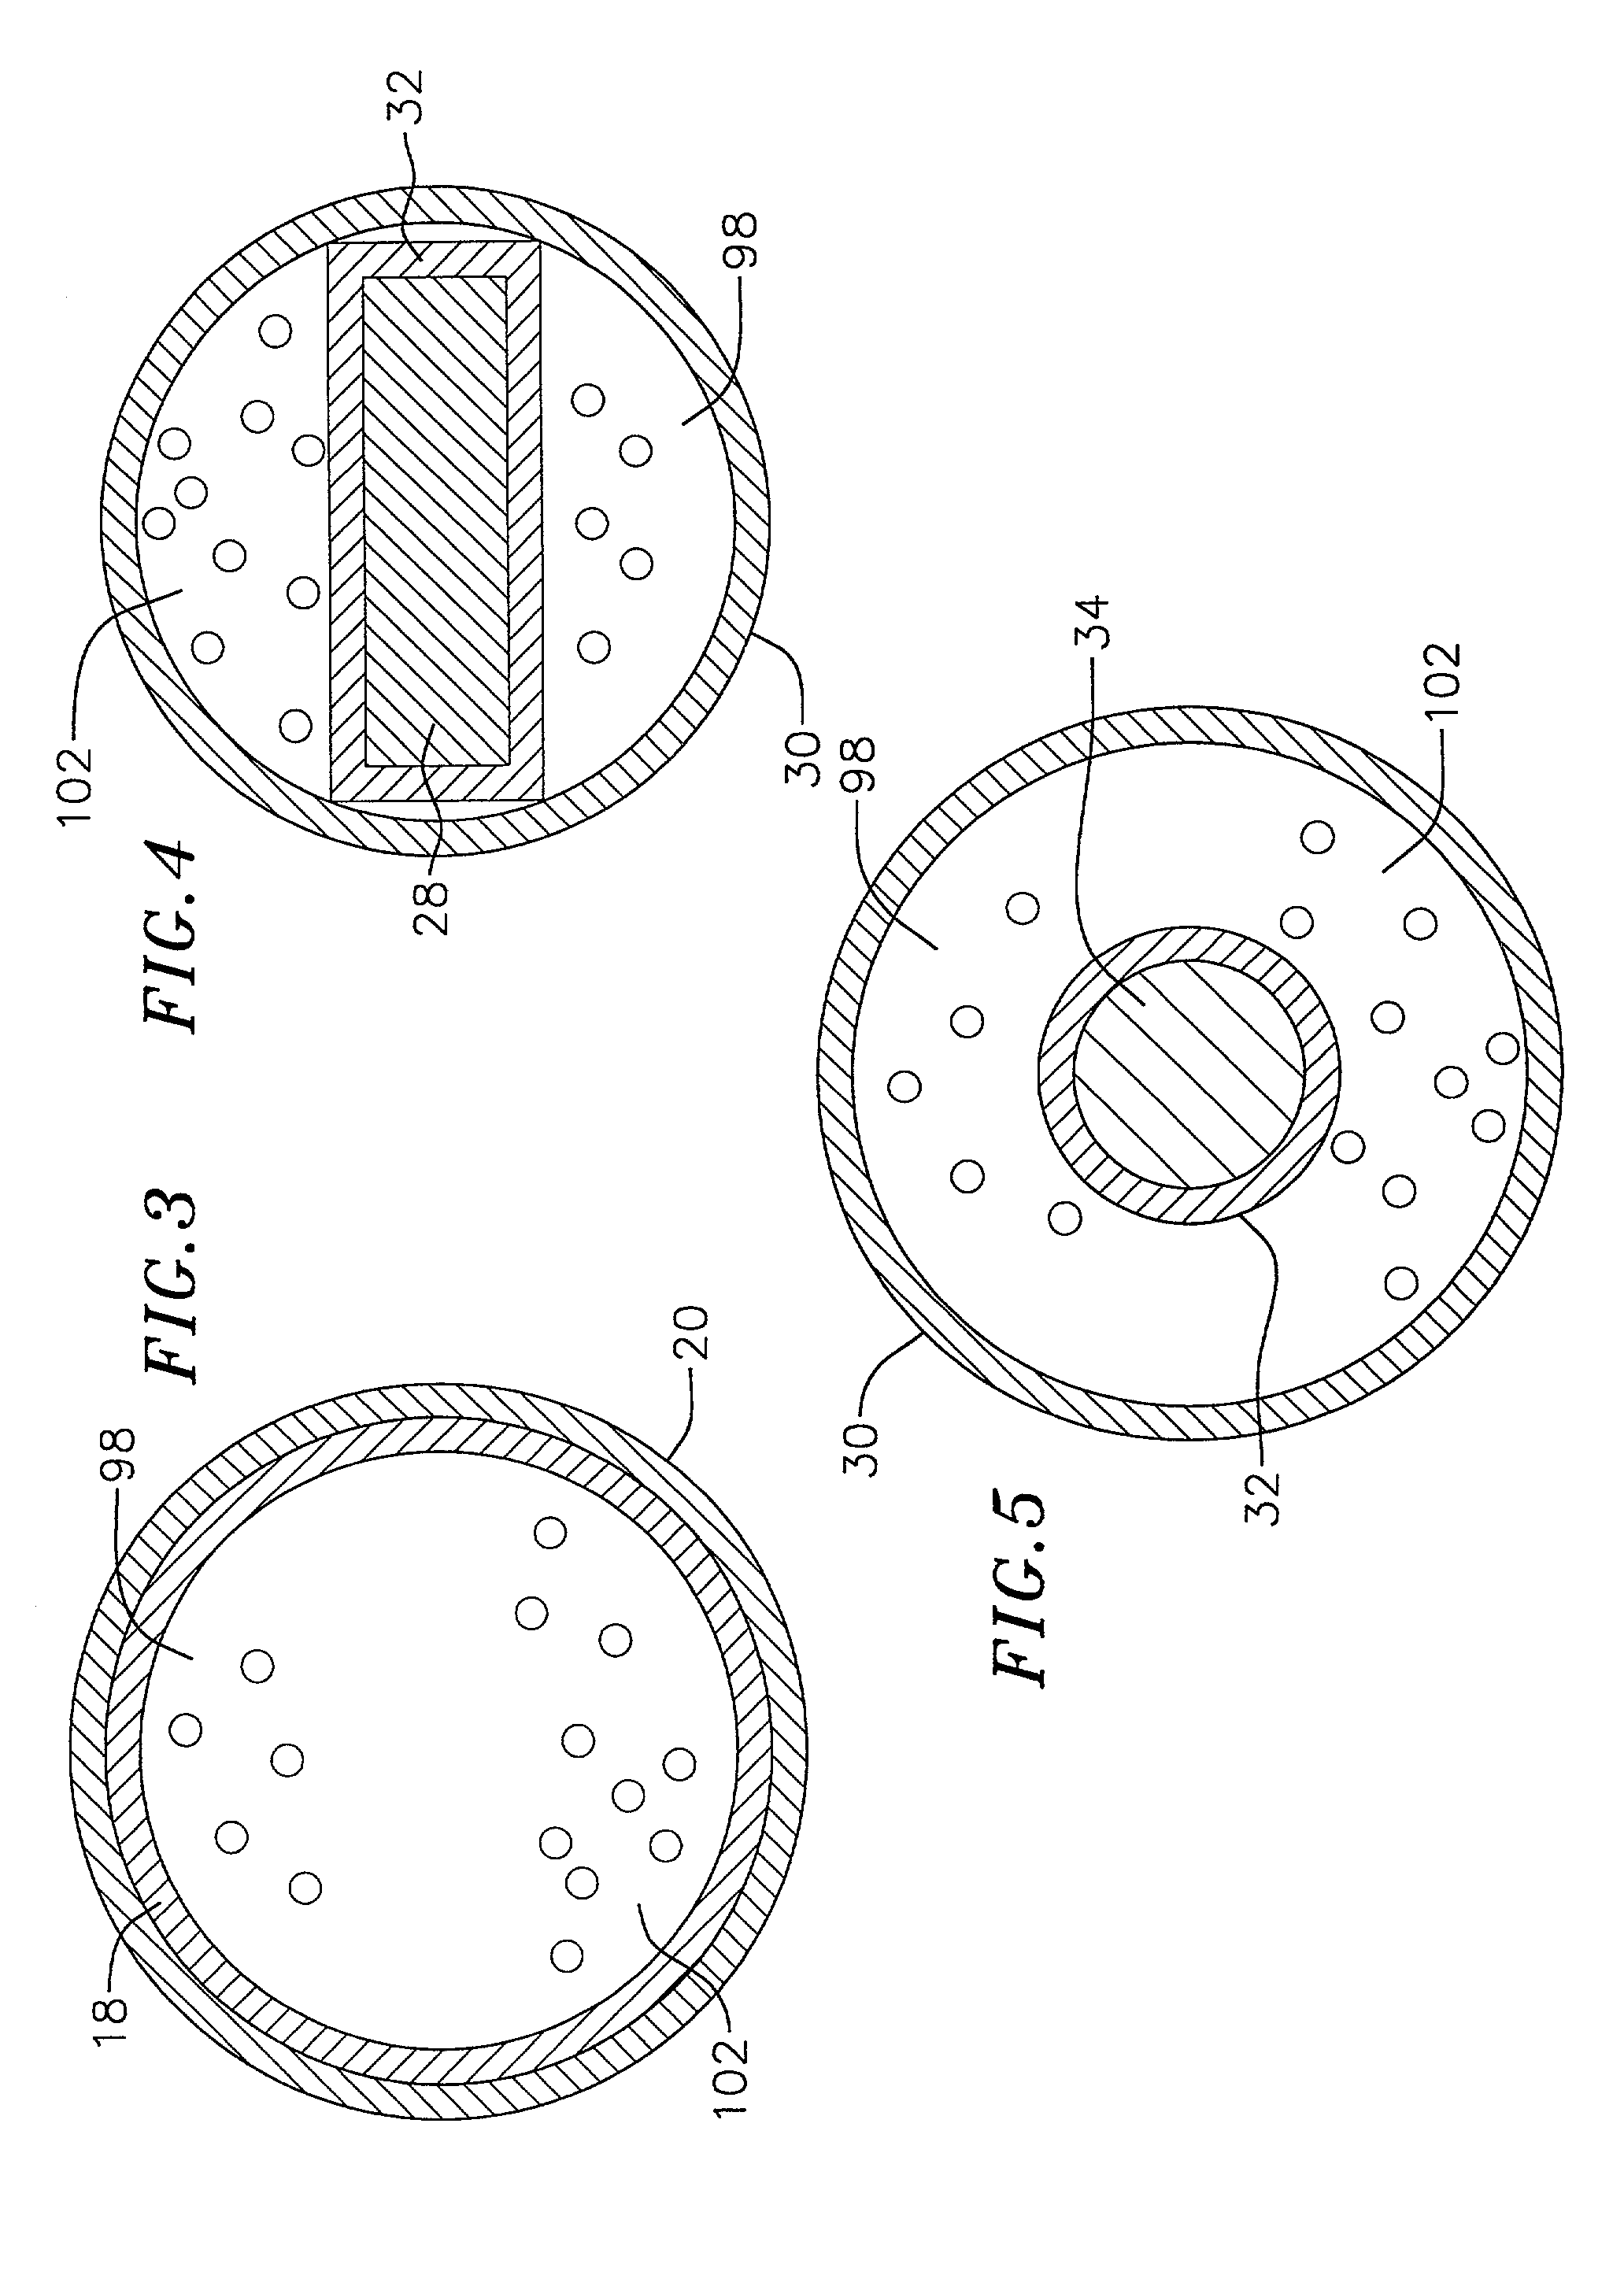 Fluid cooled apparatus for supporting diagnostic and therapeutic elements in contact with tissue